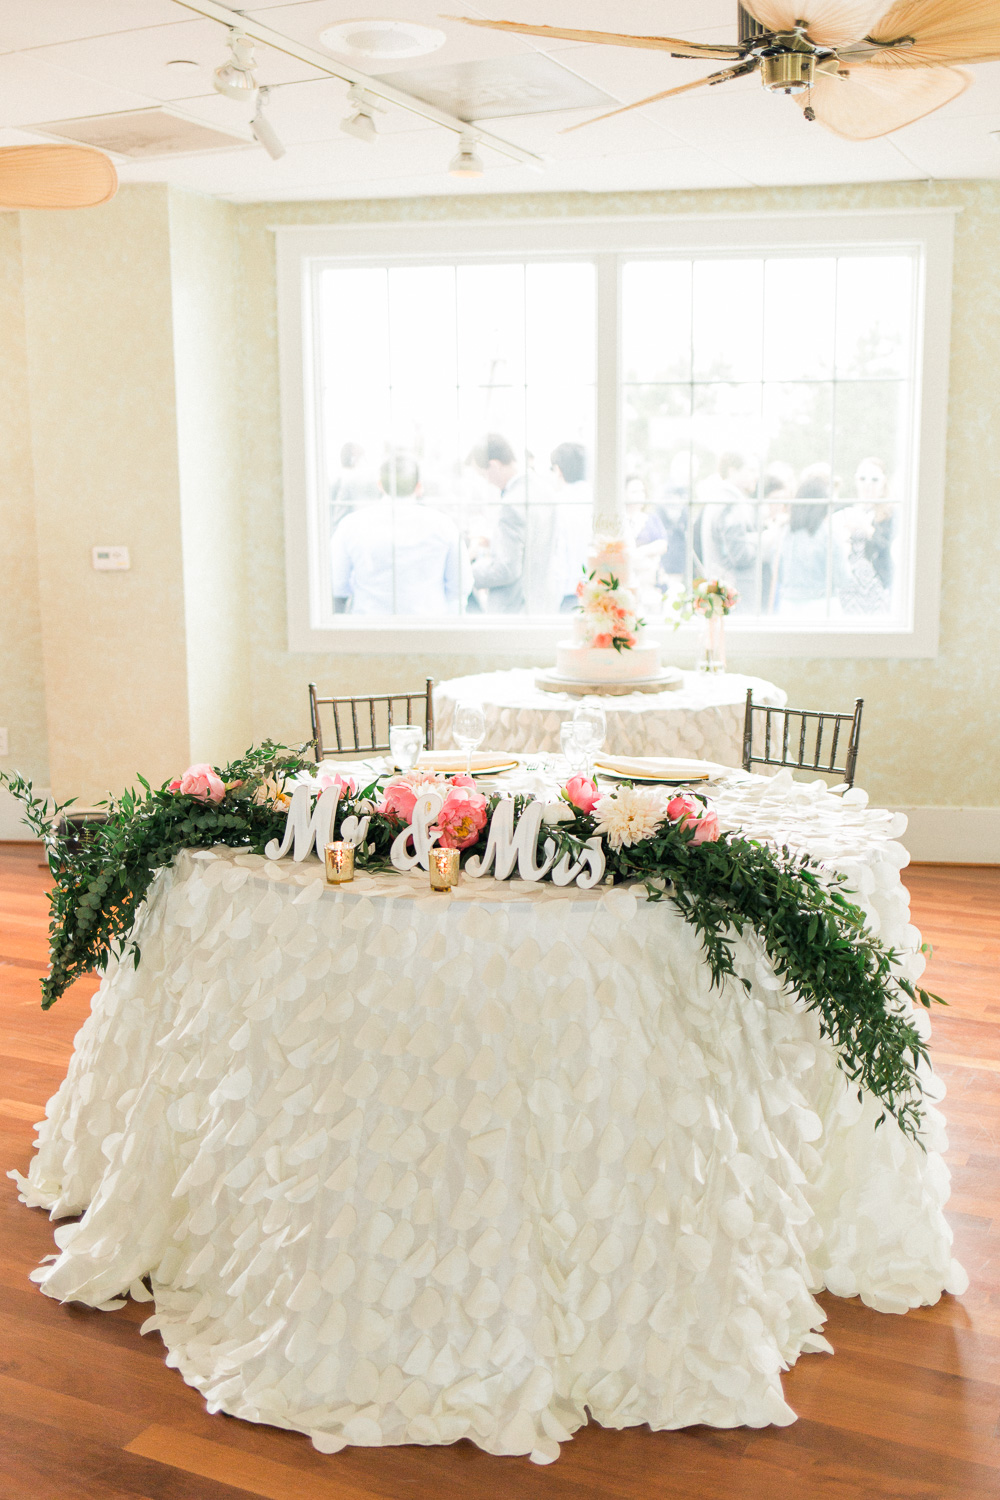 Oyster Farm at King's Creek wedding in Cape Charles, Virginia